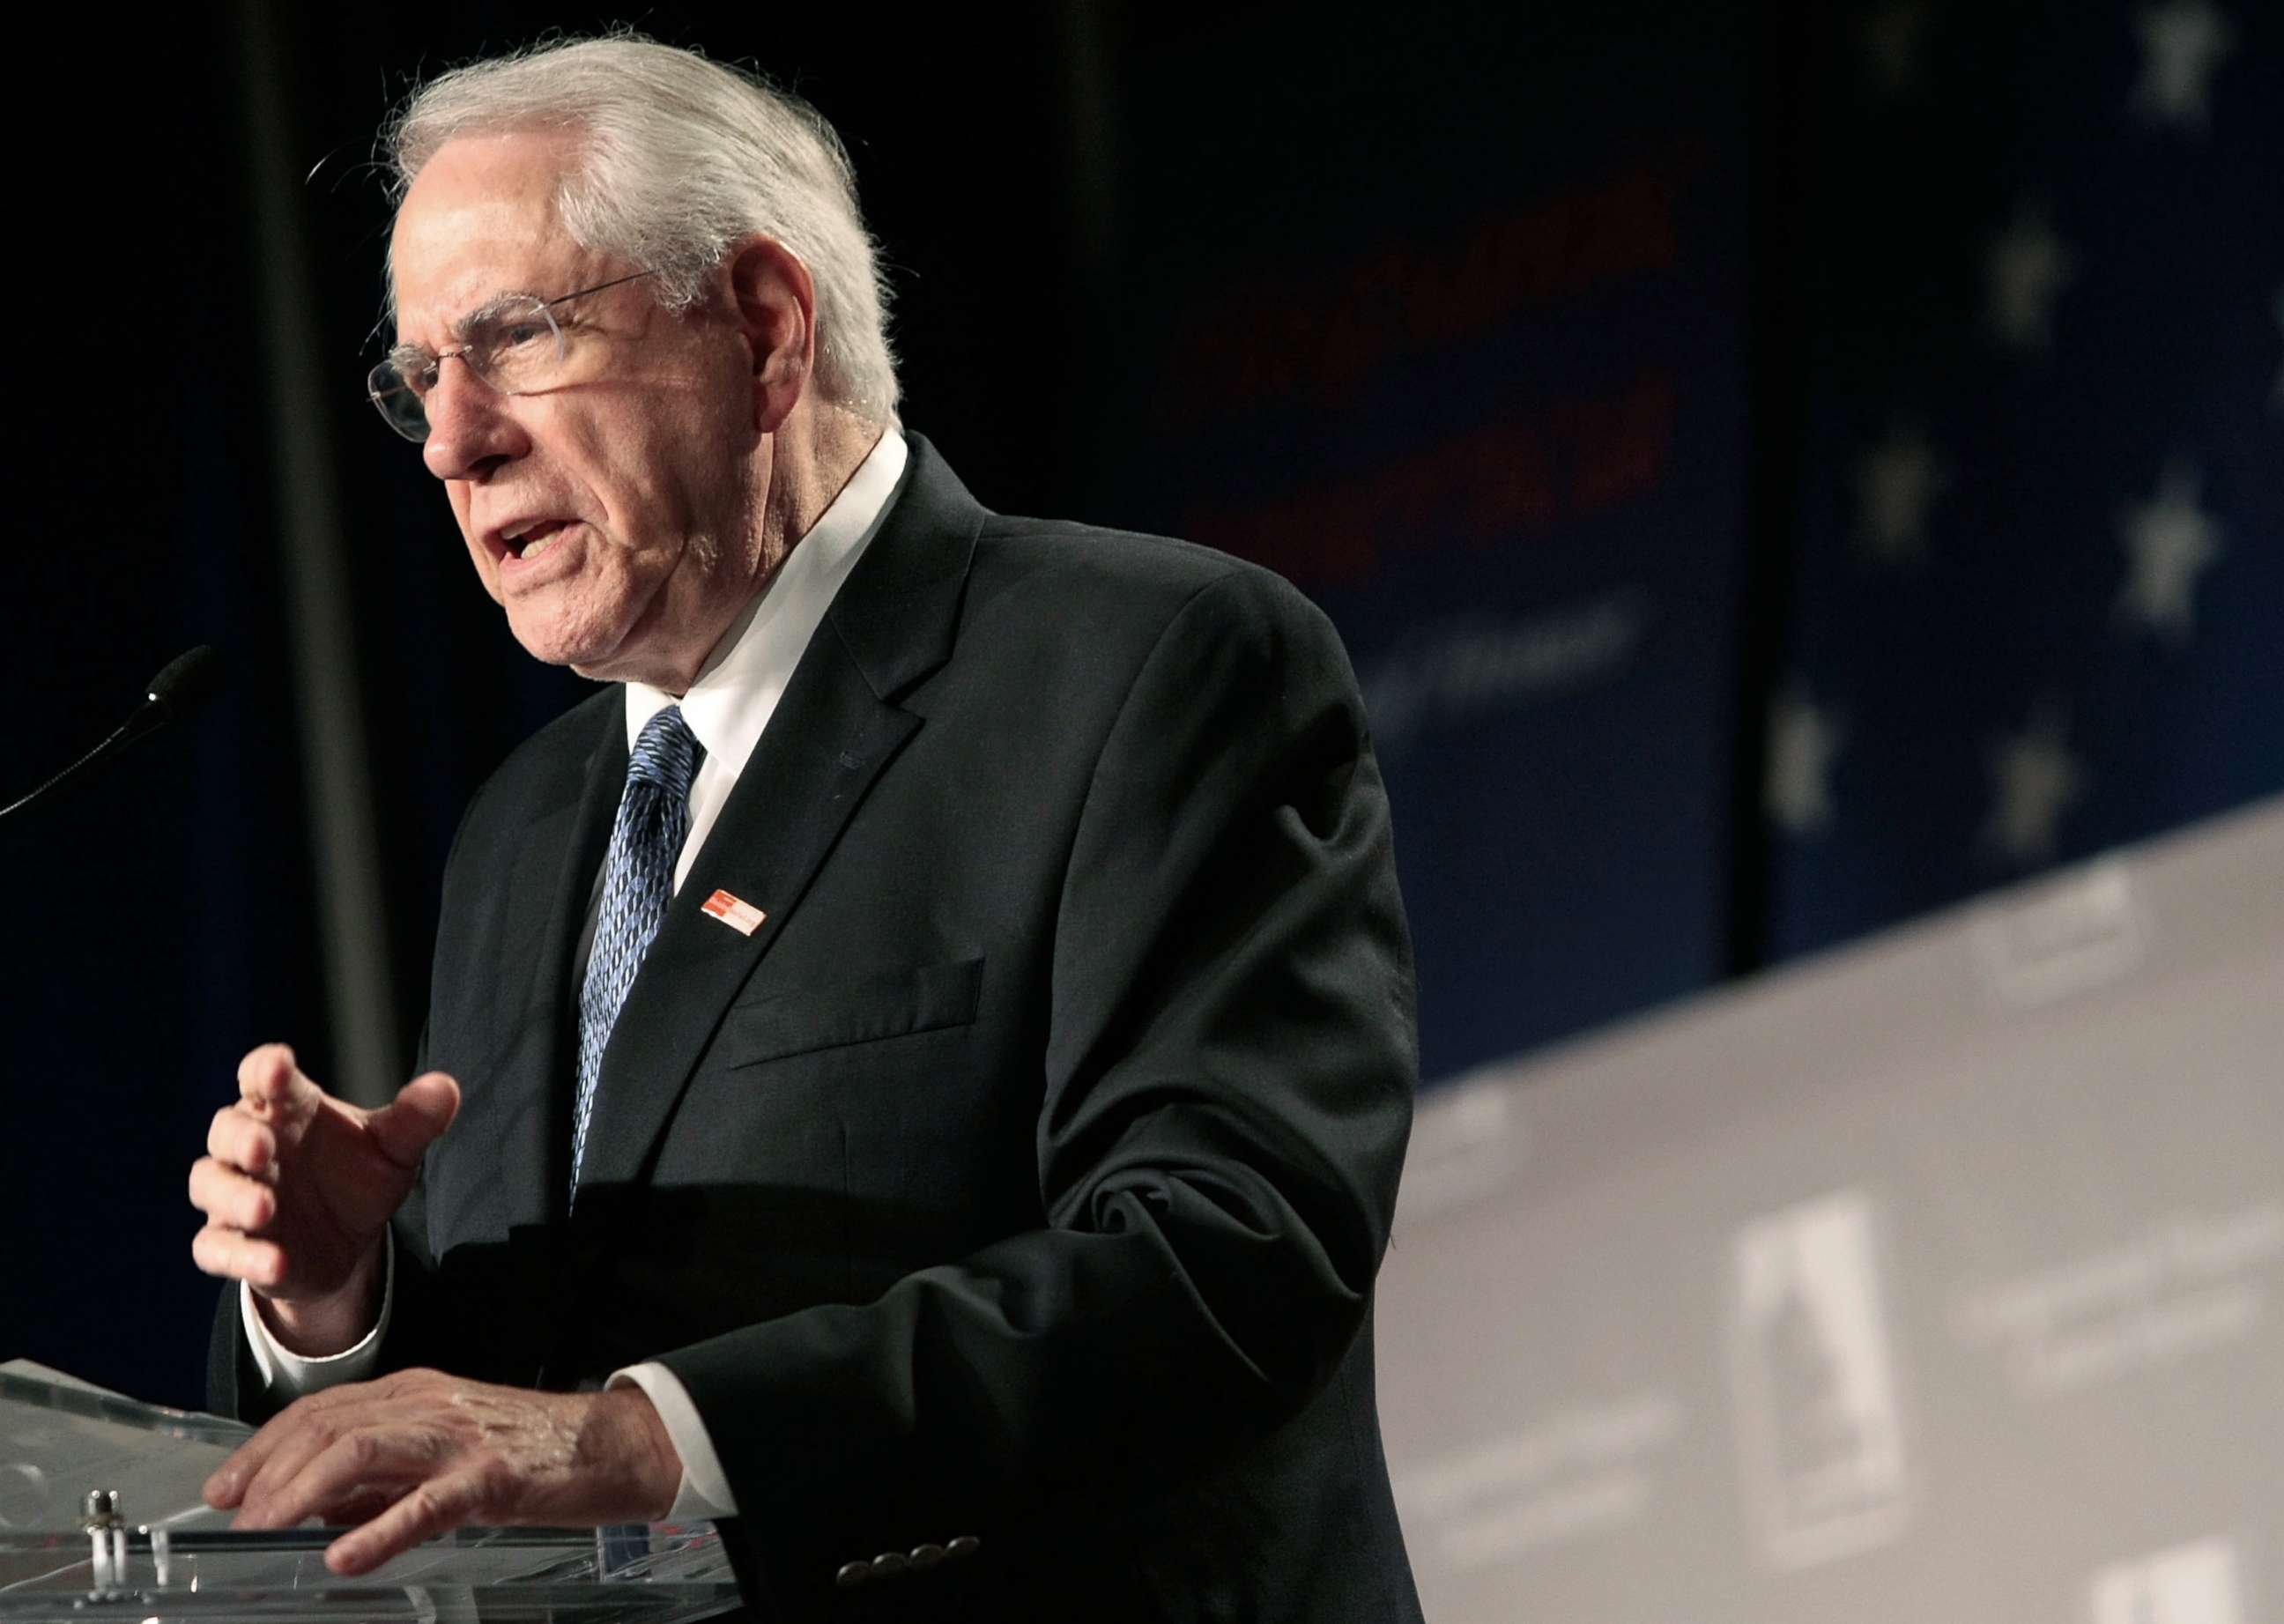 PHOTO: Democratic Presidential hopeful and former Sen. Mike Gravel (D-AK) speaks during a presidential candidates forum of the Congressional Hispanic Caucus Institute (CHCI) 2007 Public Policy Conference, Oct. 3, 2007, in Washington, D.C.